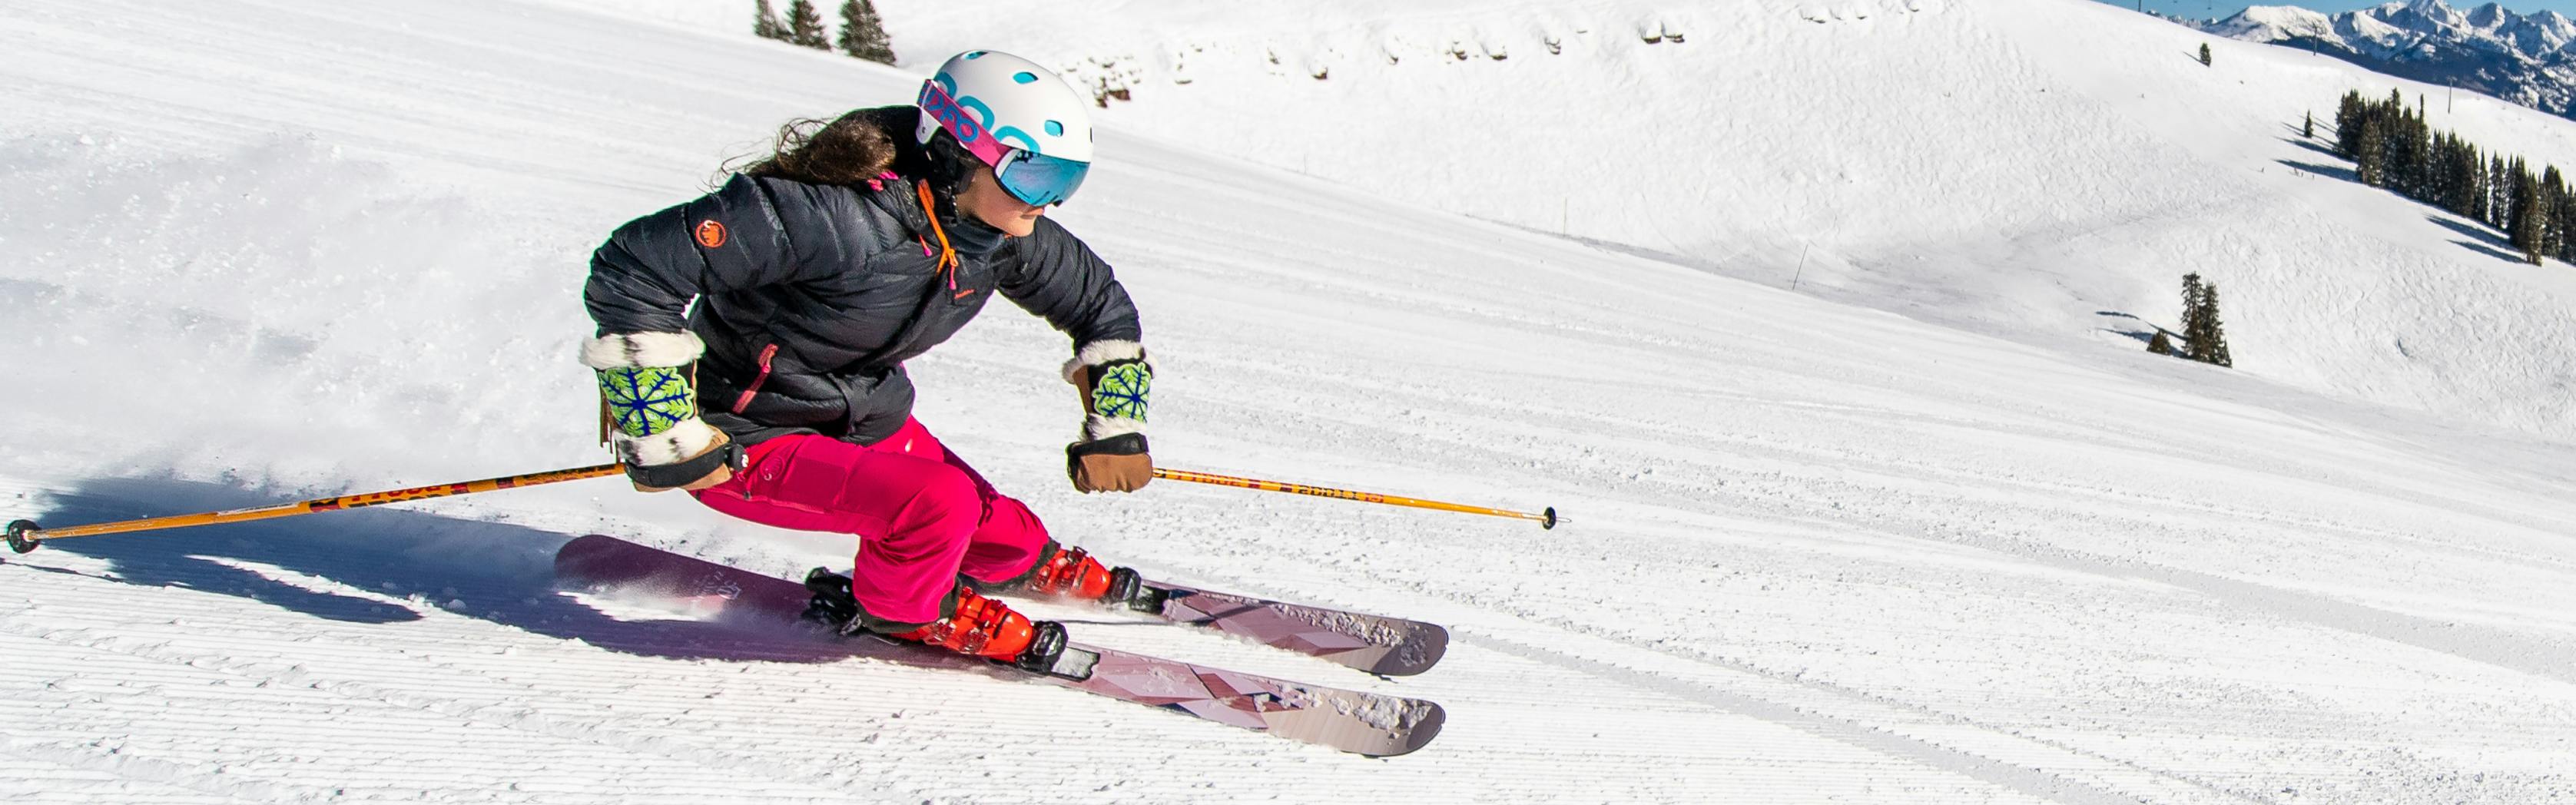 A woman in hot pink ski pants and a black jacket on purple skis and with orange poles skiing down a groomer slope